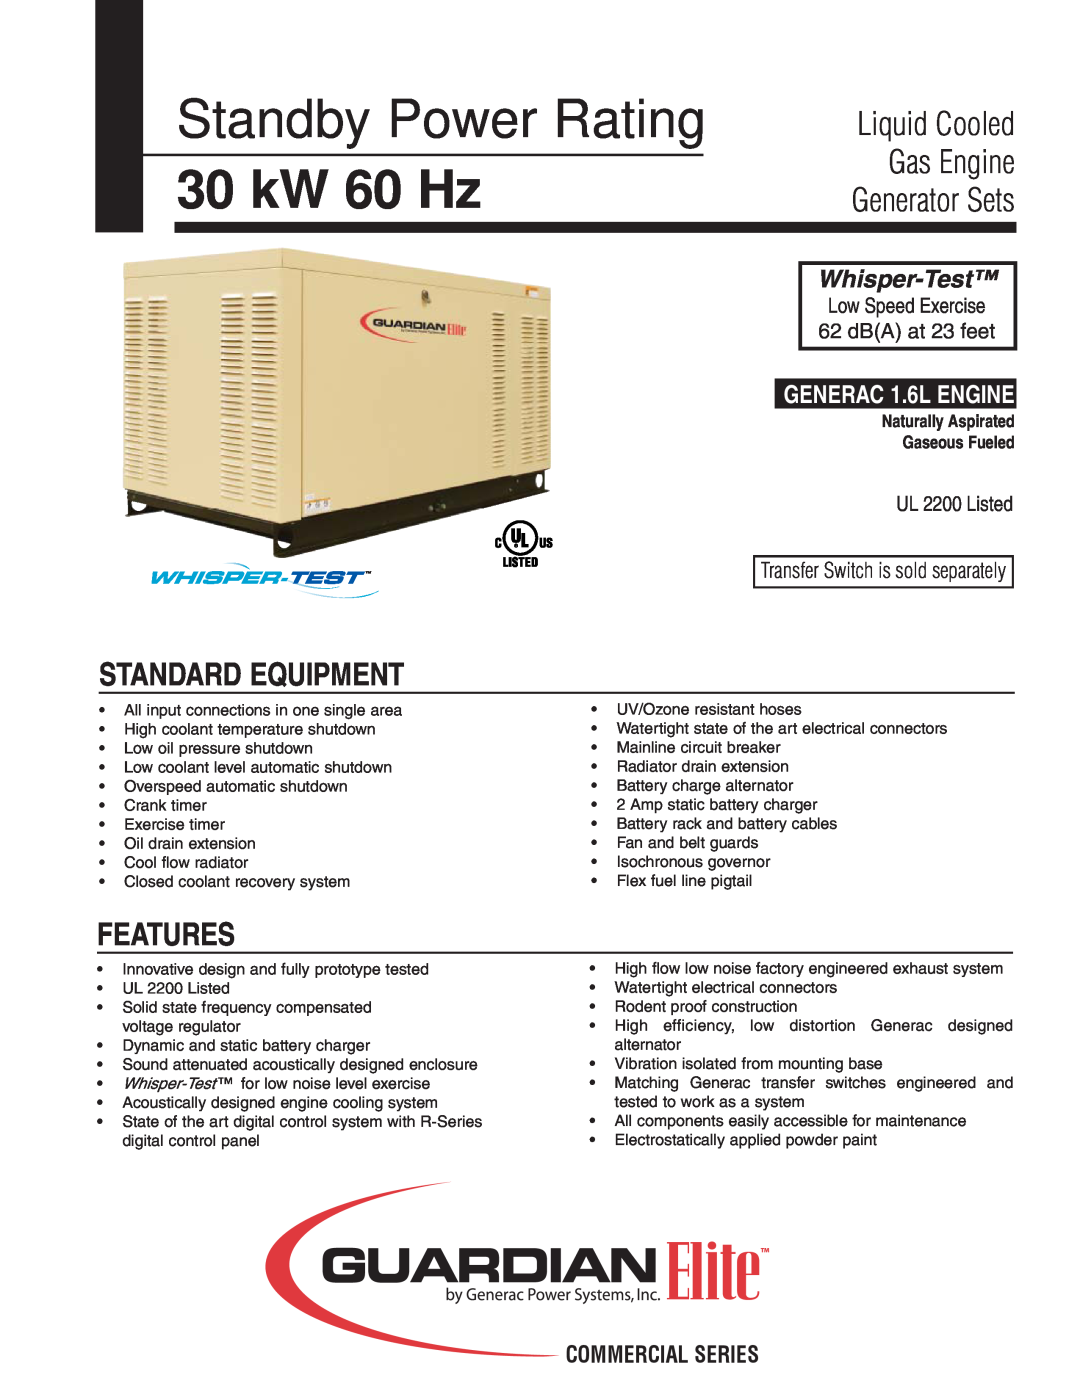 Generac Power Systems QT036 manual Standard Equipment, Features, Naturally Aspirated Gaseous Fueled, Standby Power Rating 